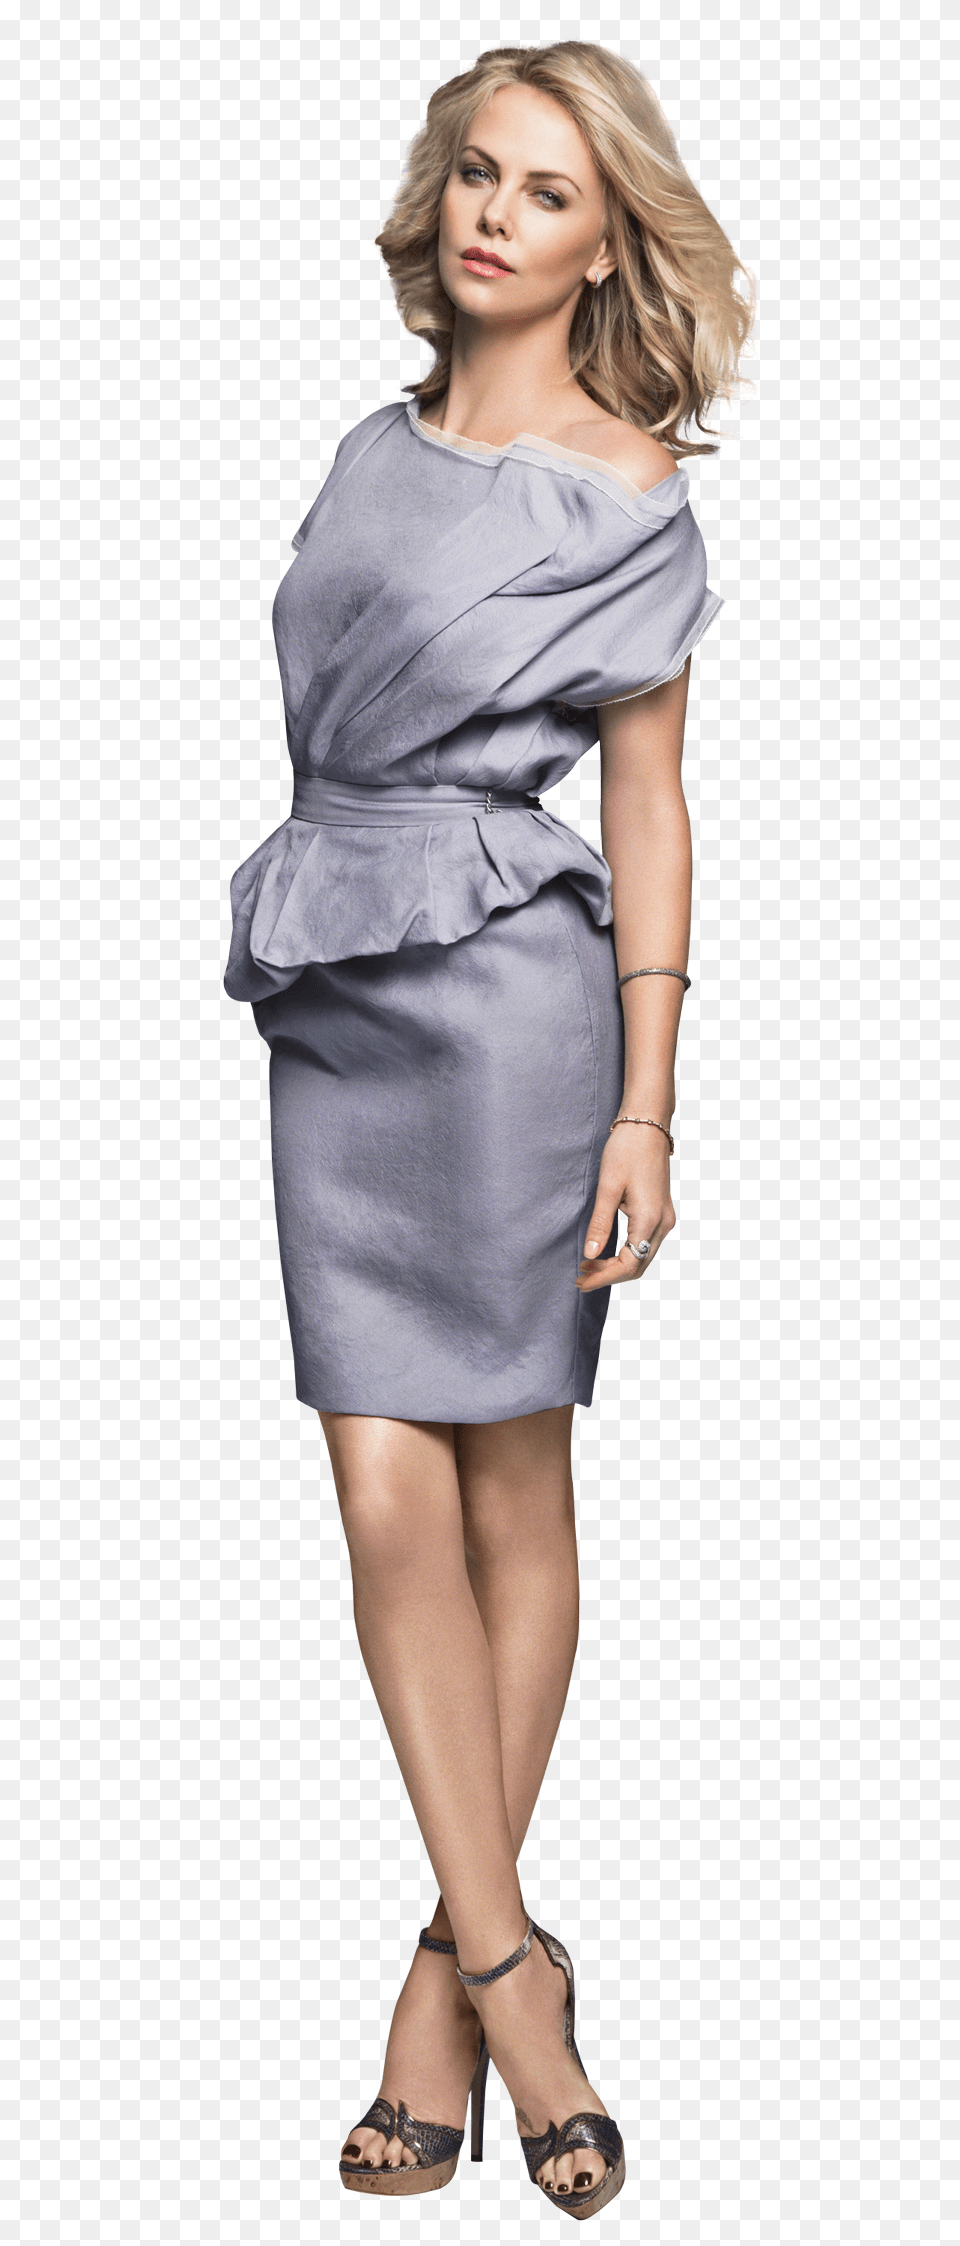 Pngpix Com Charlize Theron Image, Adult, Sandal, Person, Formal Wear Free Png